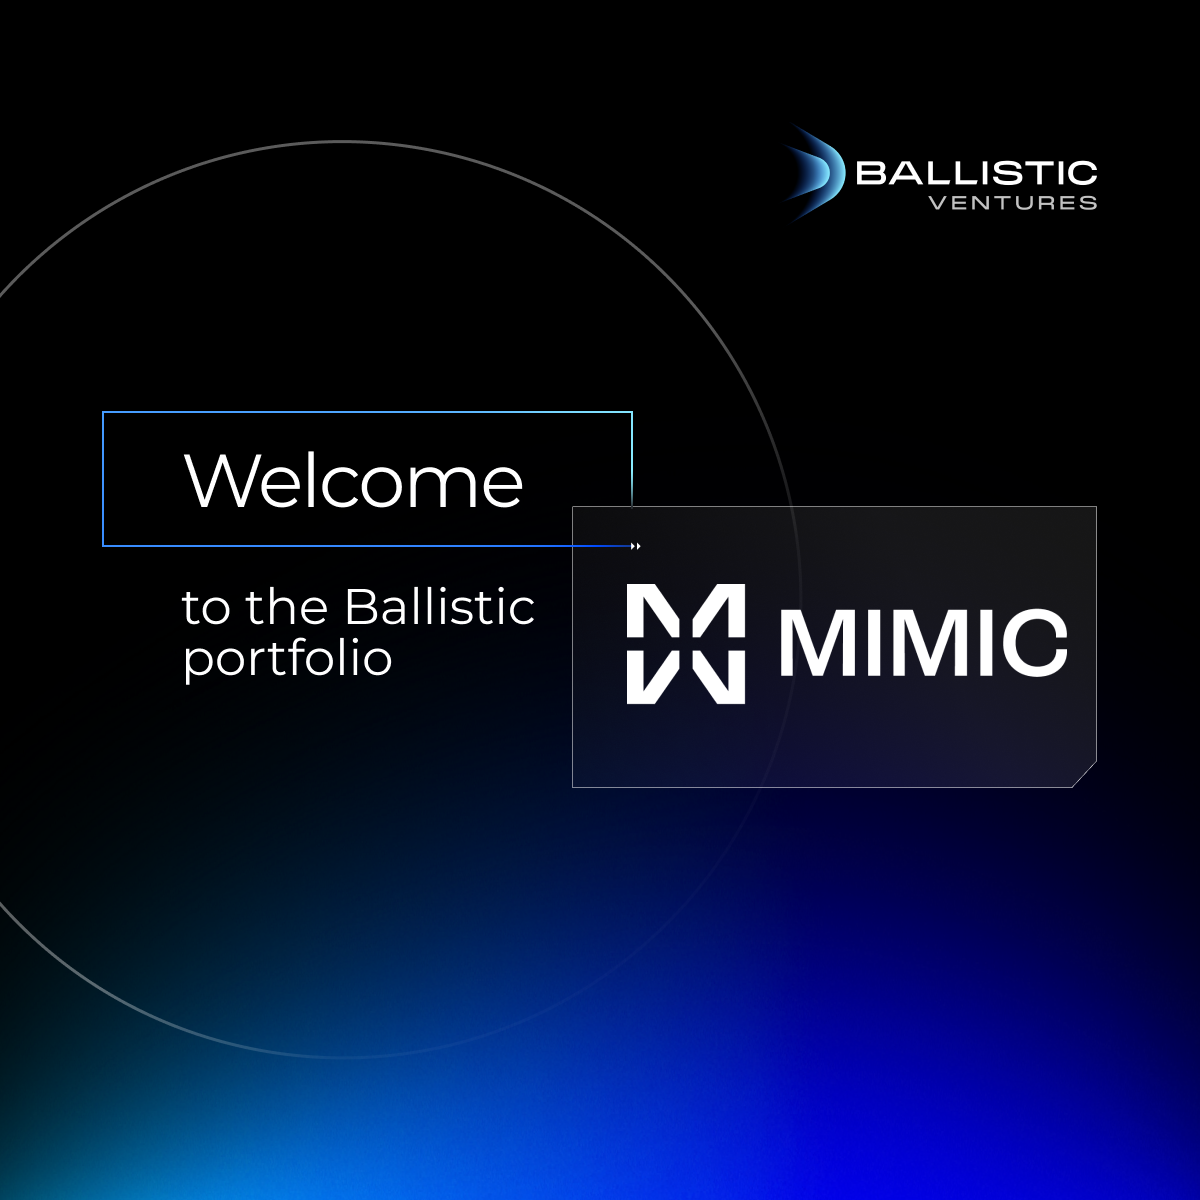 Why we invested in Mimic